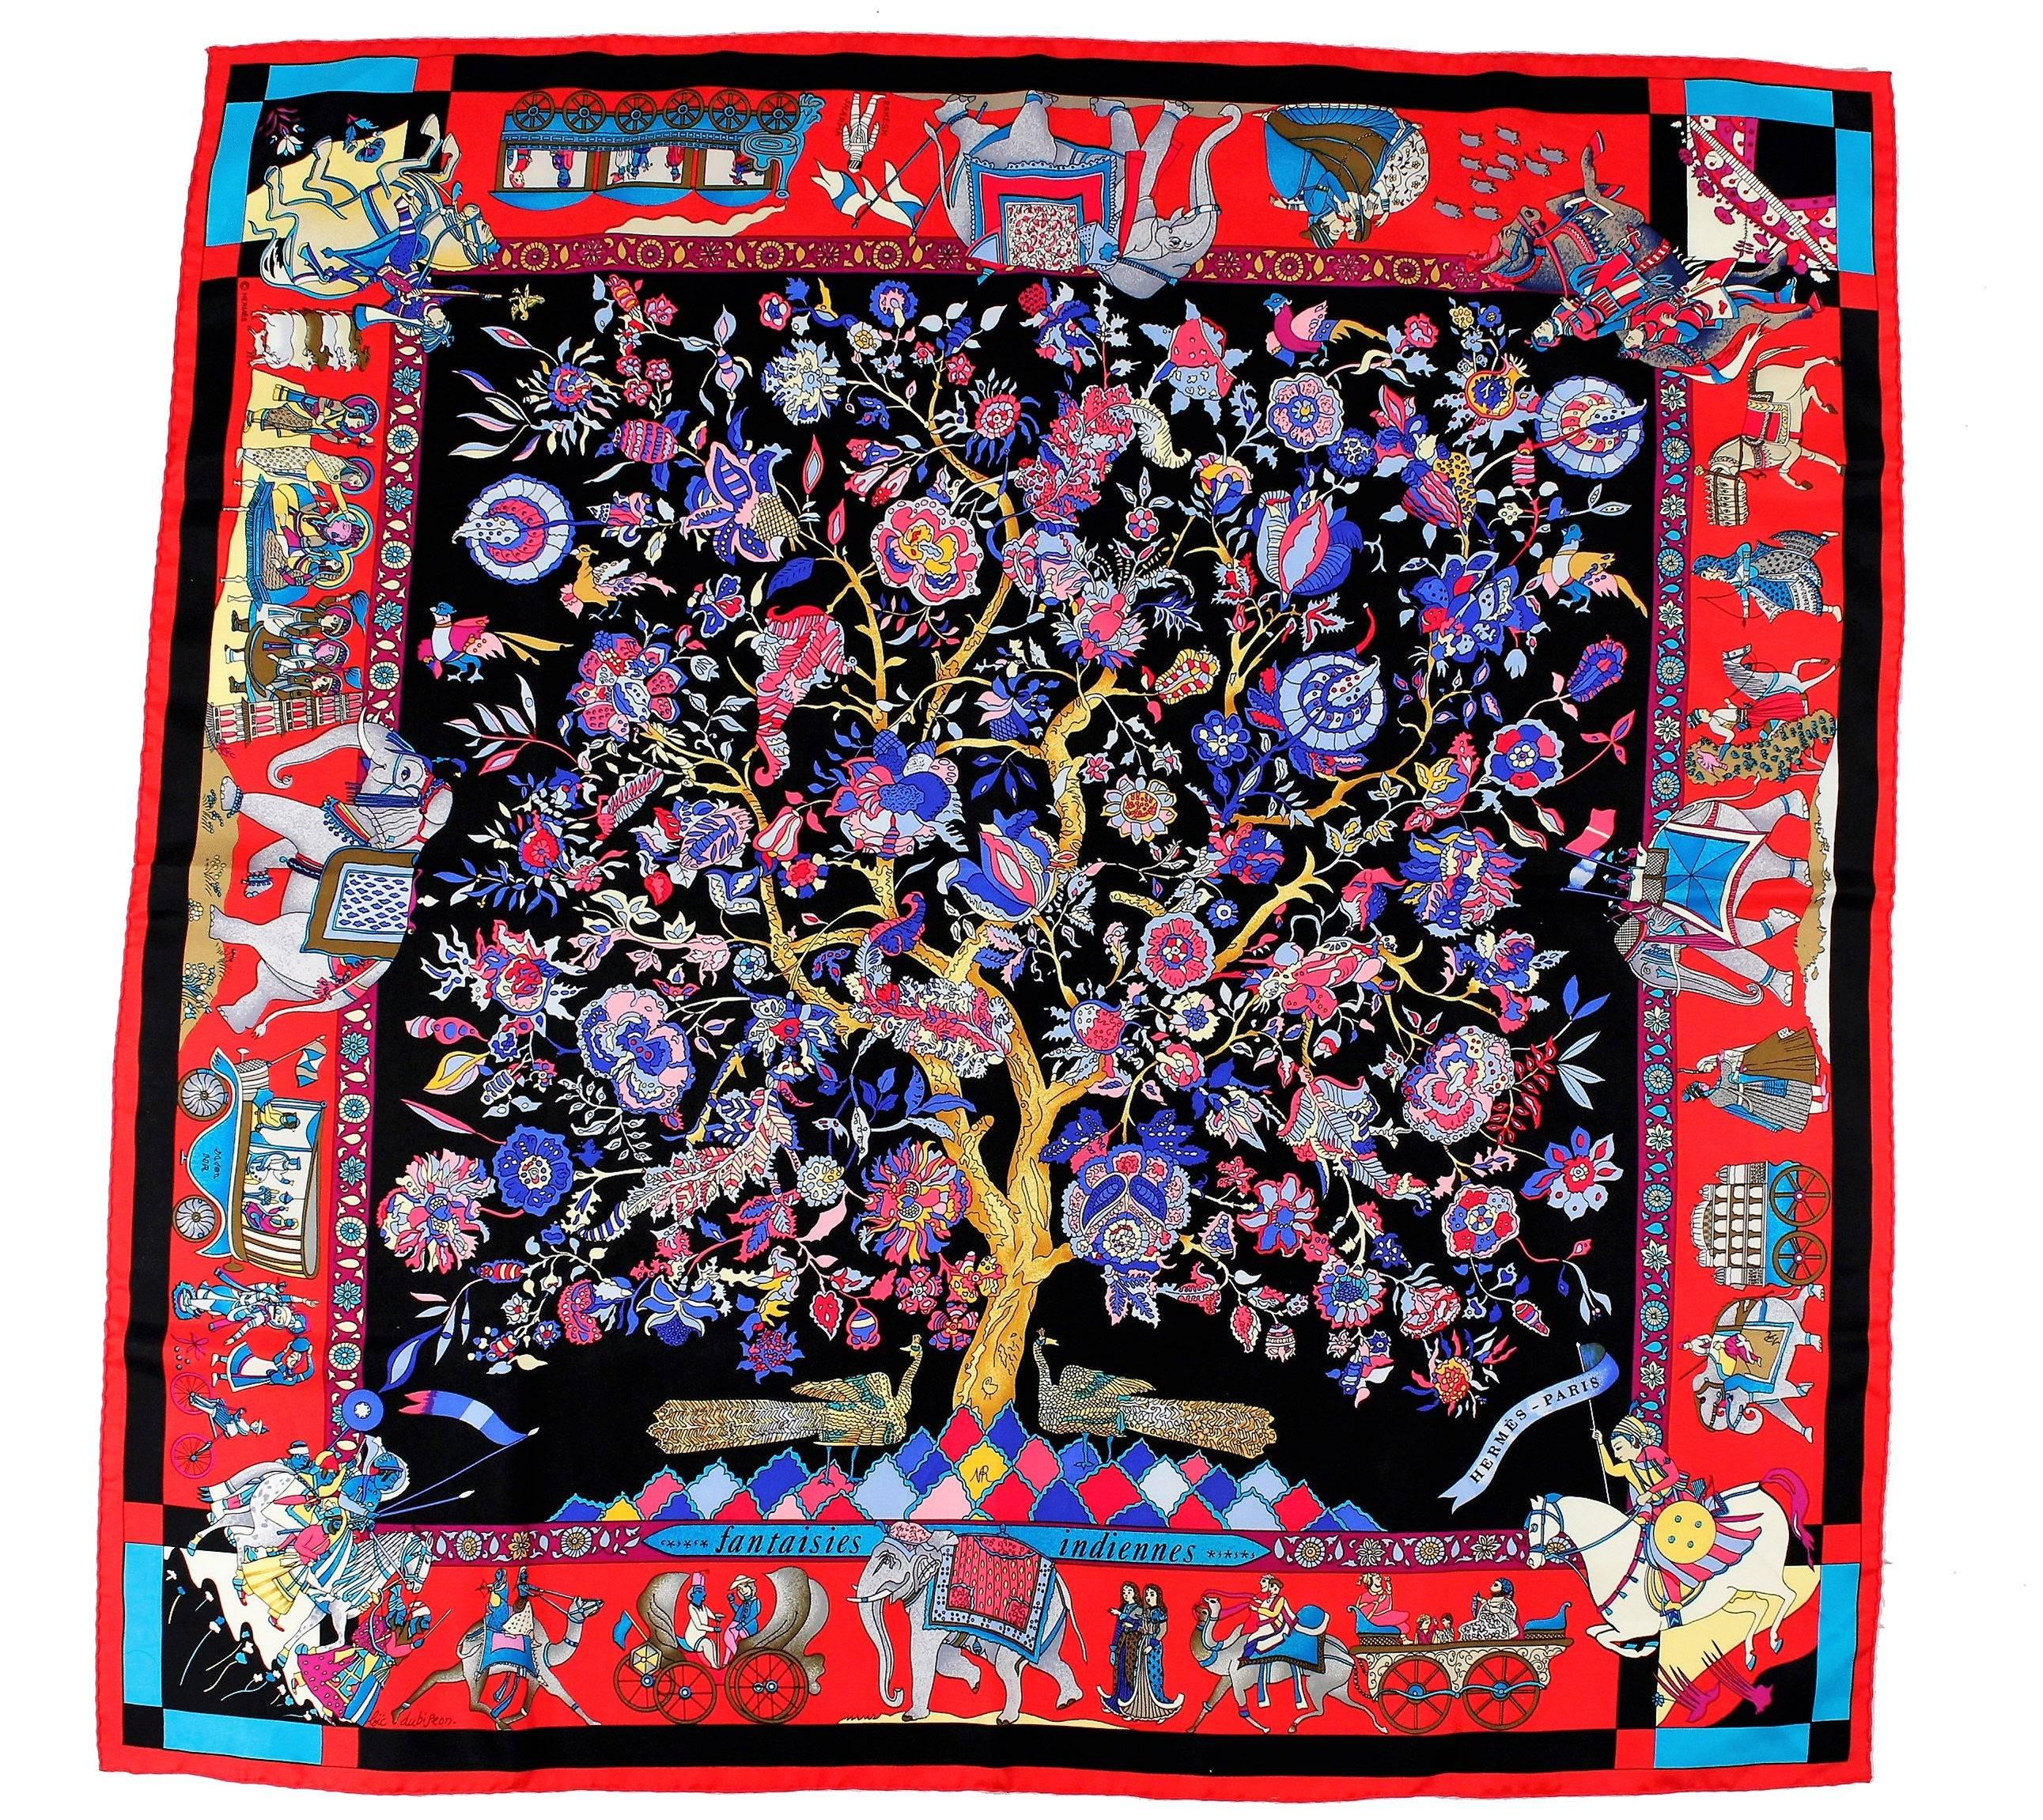 This colorful silk twill scarf was designed by Loic Dubigeon for Hermes, and most likely released in 2008, when Hermes theme was The Year of India.  This lovely colorway features mythological creatures, astronaut Rakesh Sharma, and a majestic tree